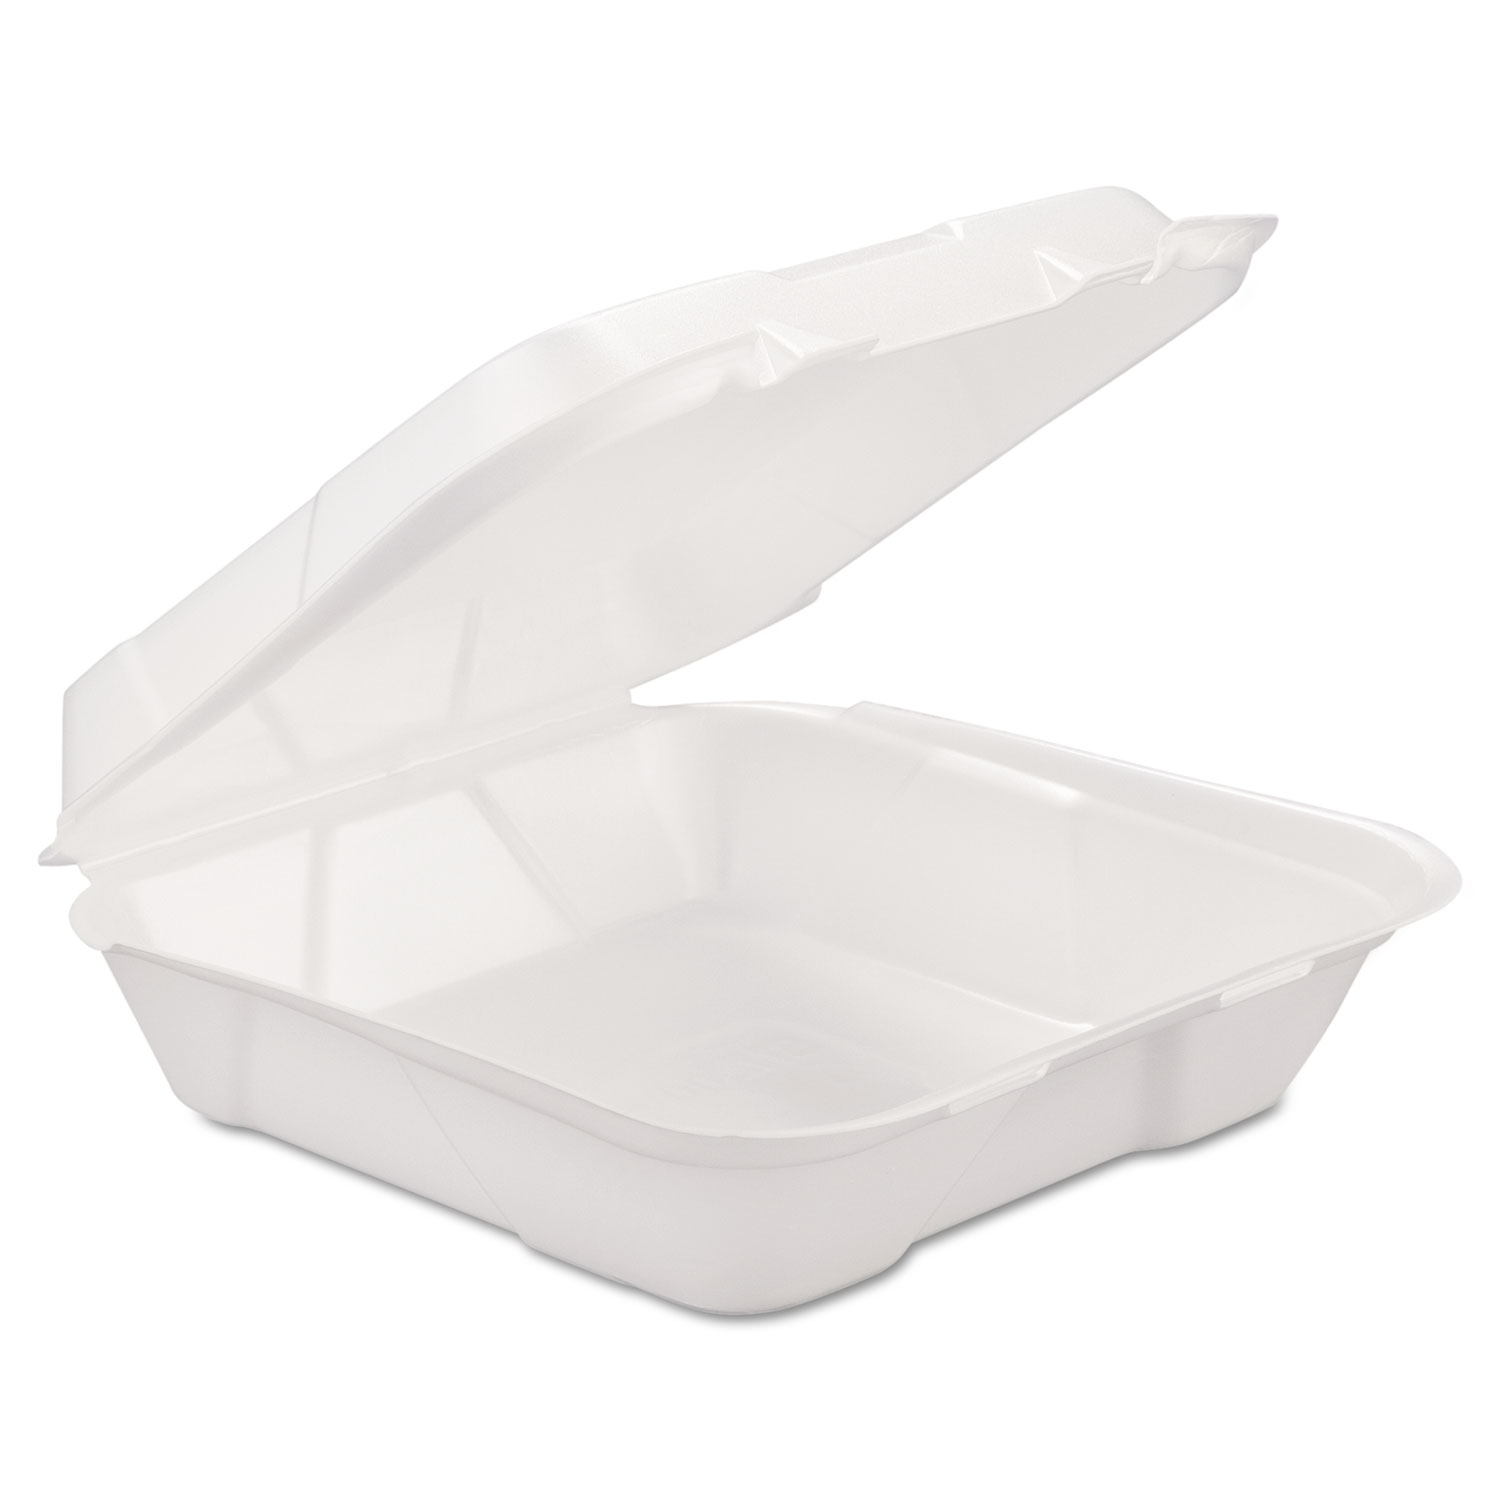  GEN SN200VW-H-0183400 Foam Hinged Carryout Container, 1-Comp, White, 9 1/4 X 9 1/4 X 3, 200/Carton (GENHINGEDL1) 